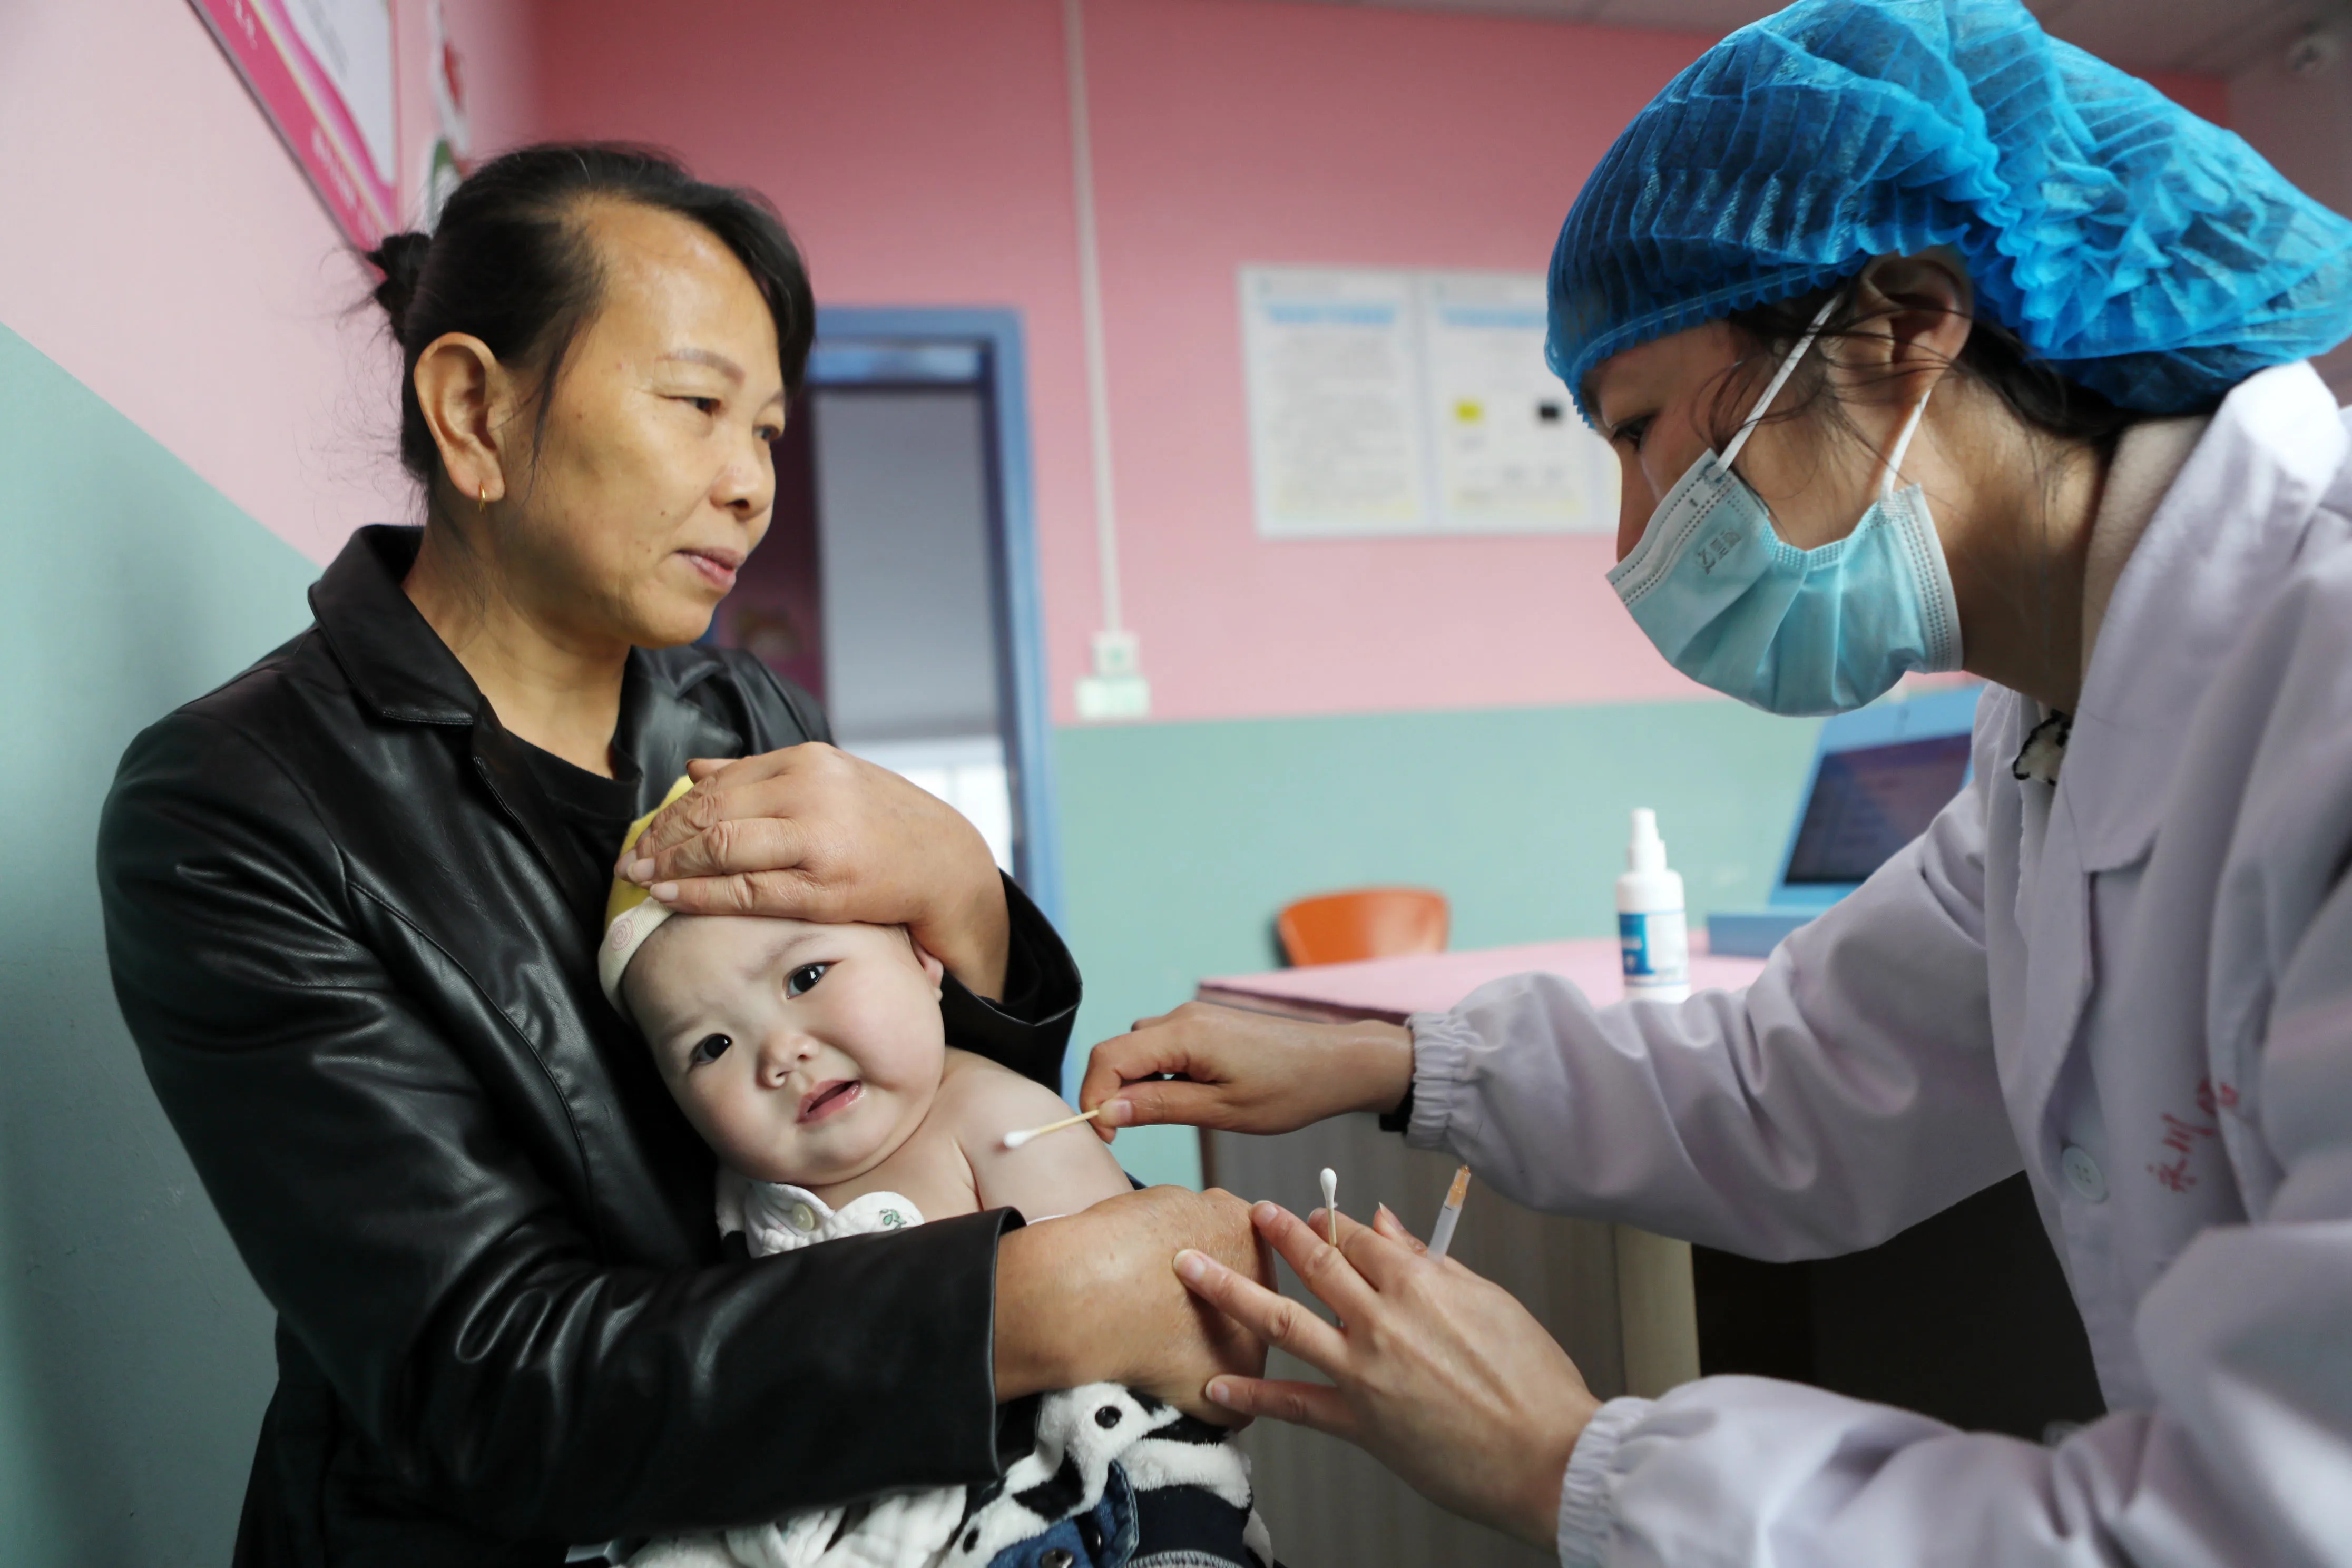 Pic: Mysterious pneumonia surge in China, hospitals flooding with sick children